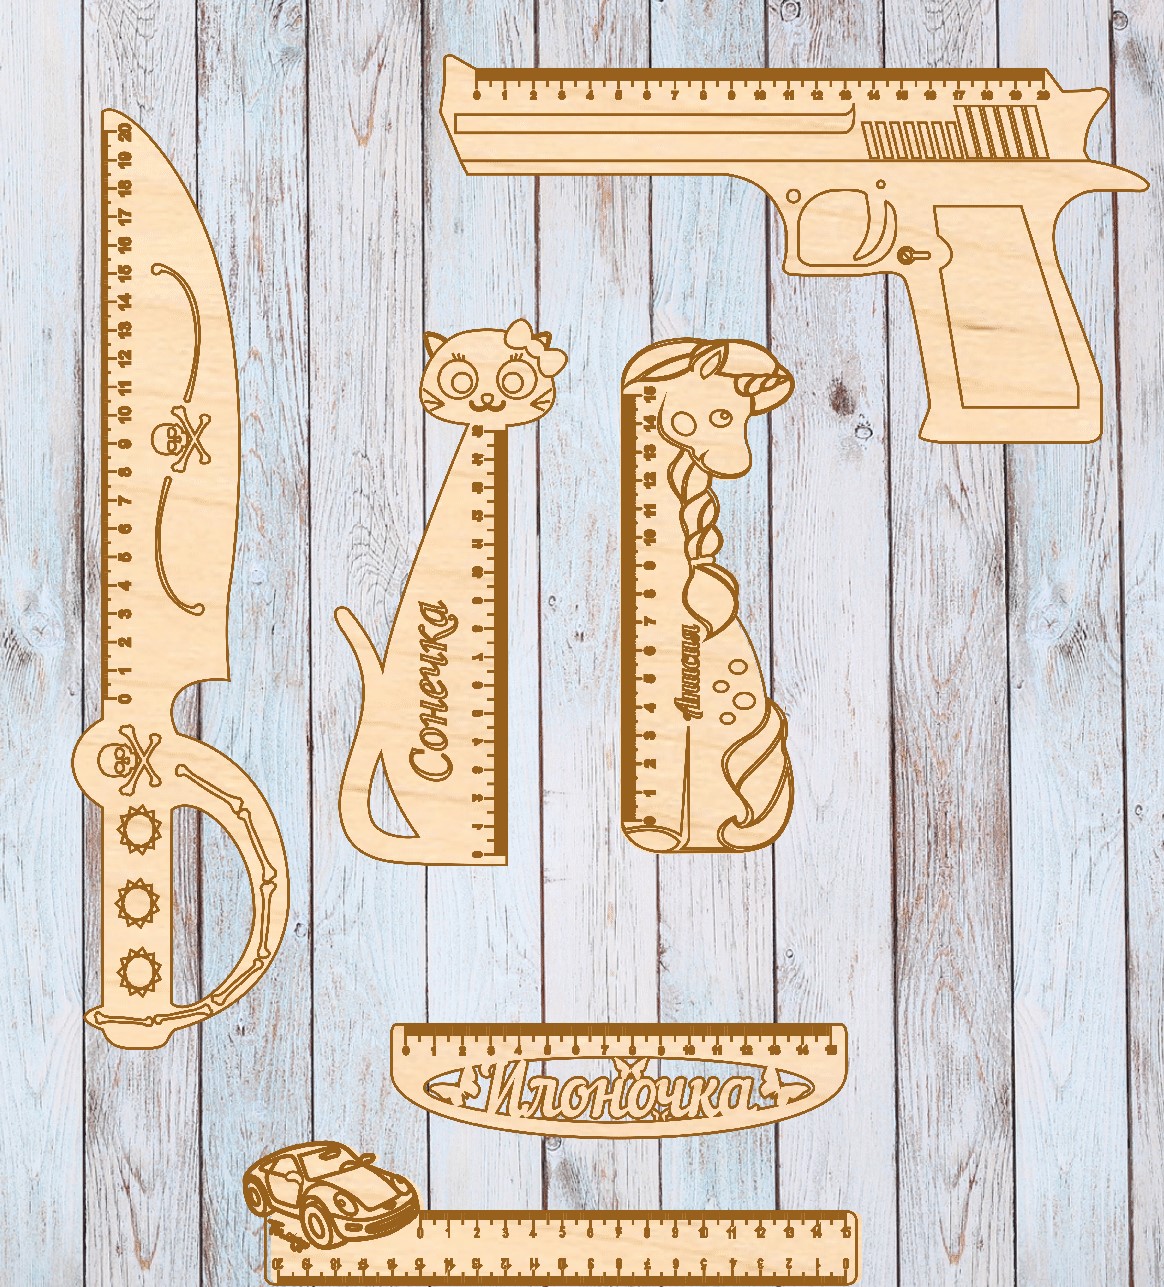 Laser Cut Retro Shaped Wooden Rulers Free Vector